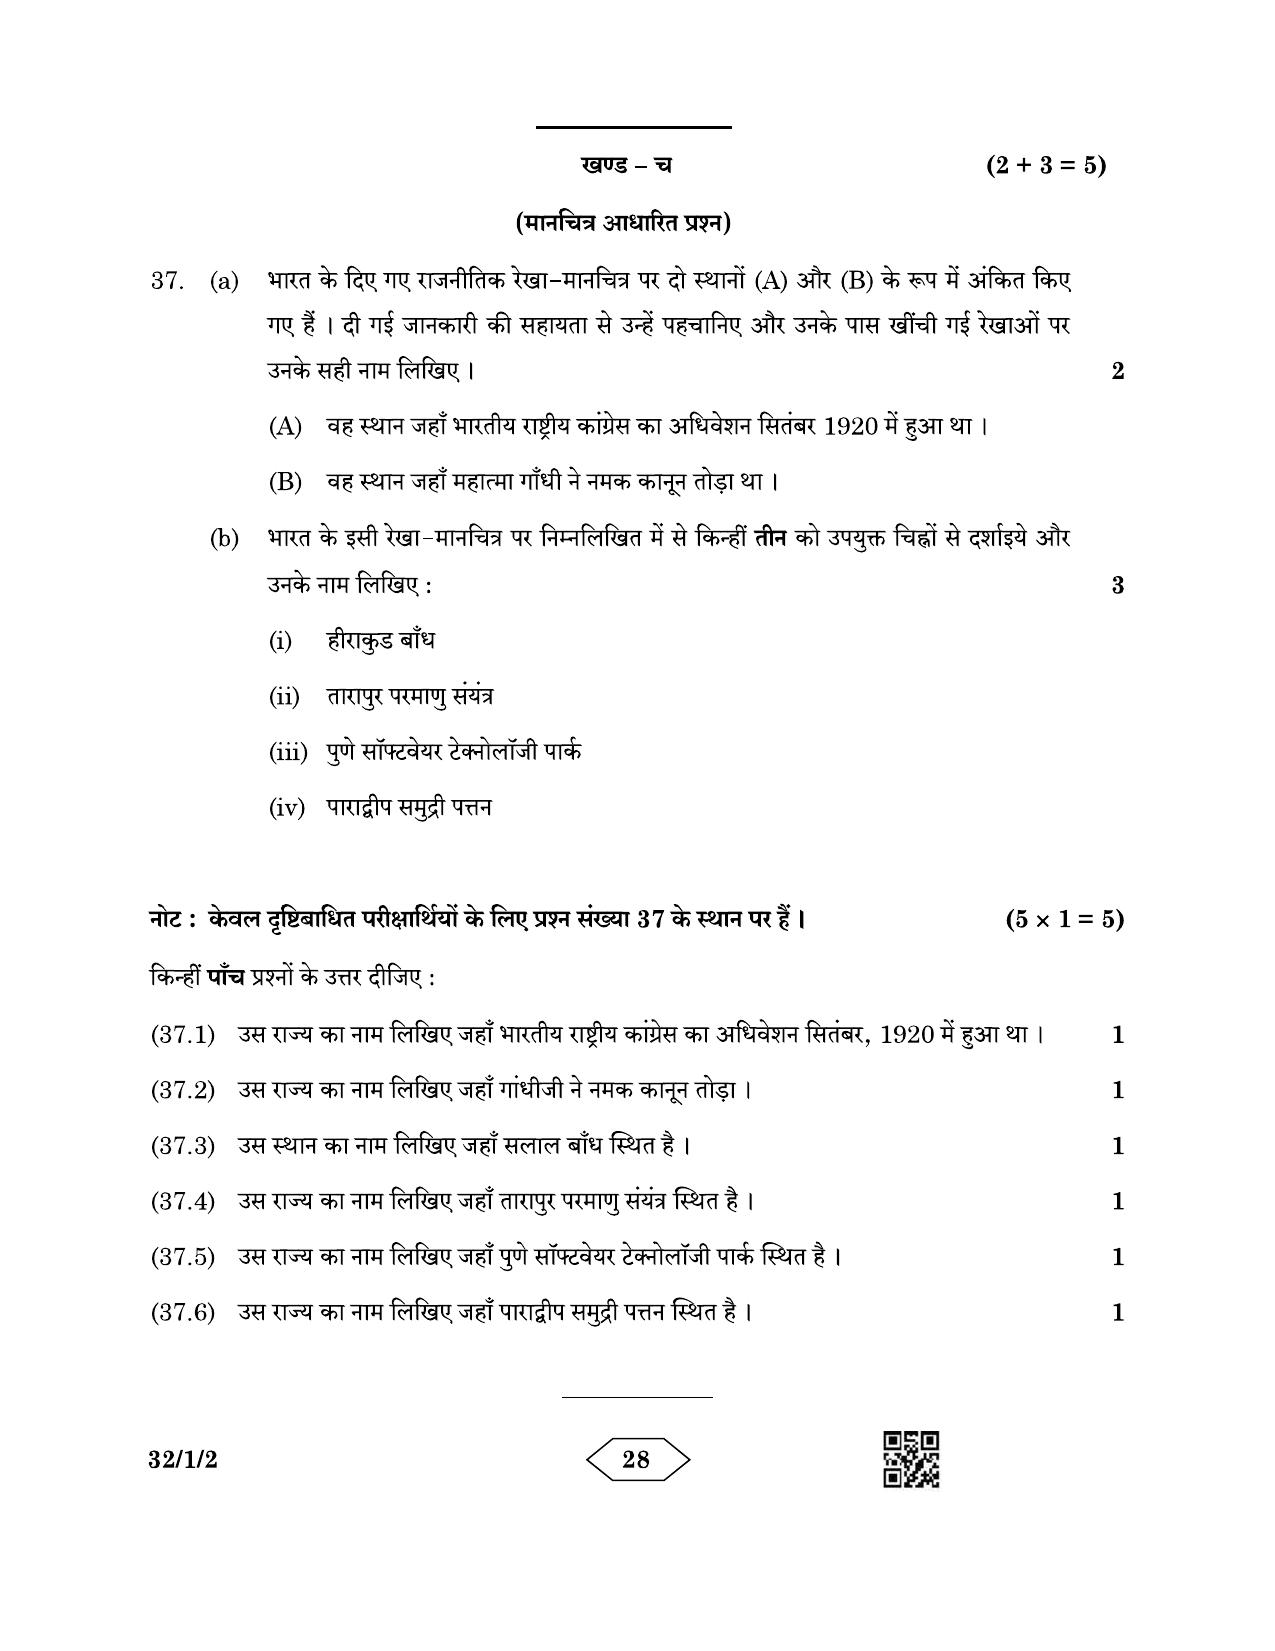 CBSE Class 10 32-1-2 Social Science 2023 Question Paper - Page 28